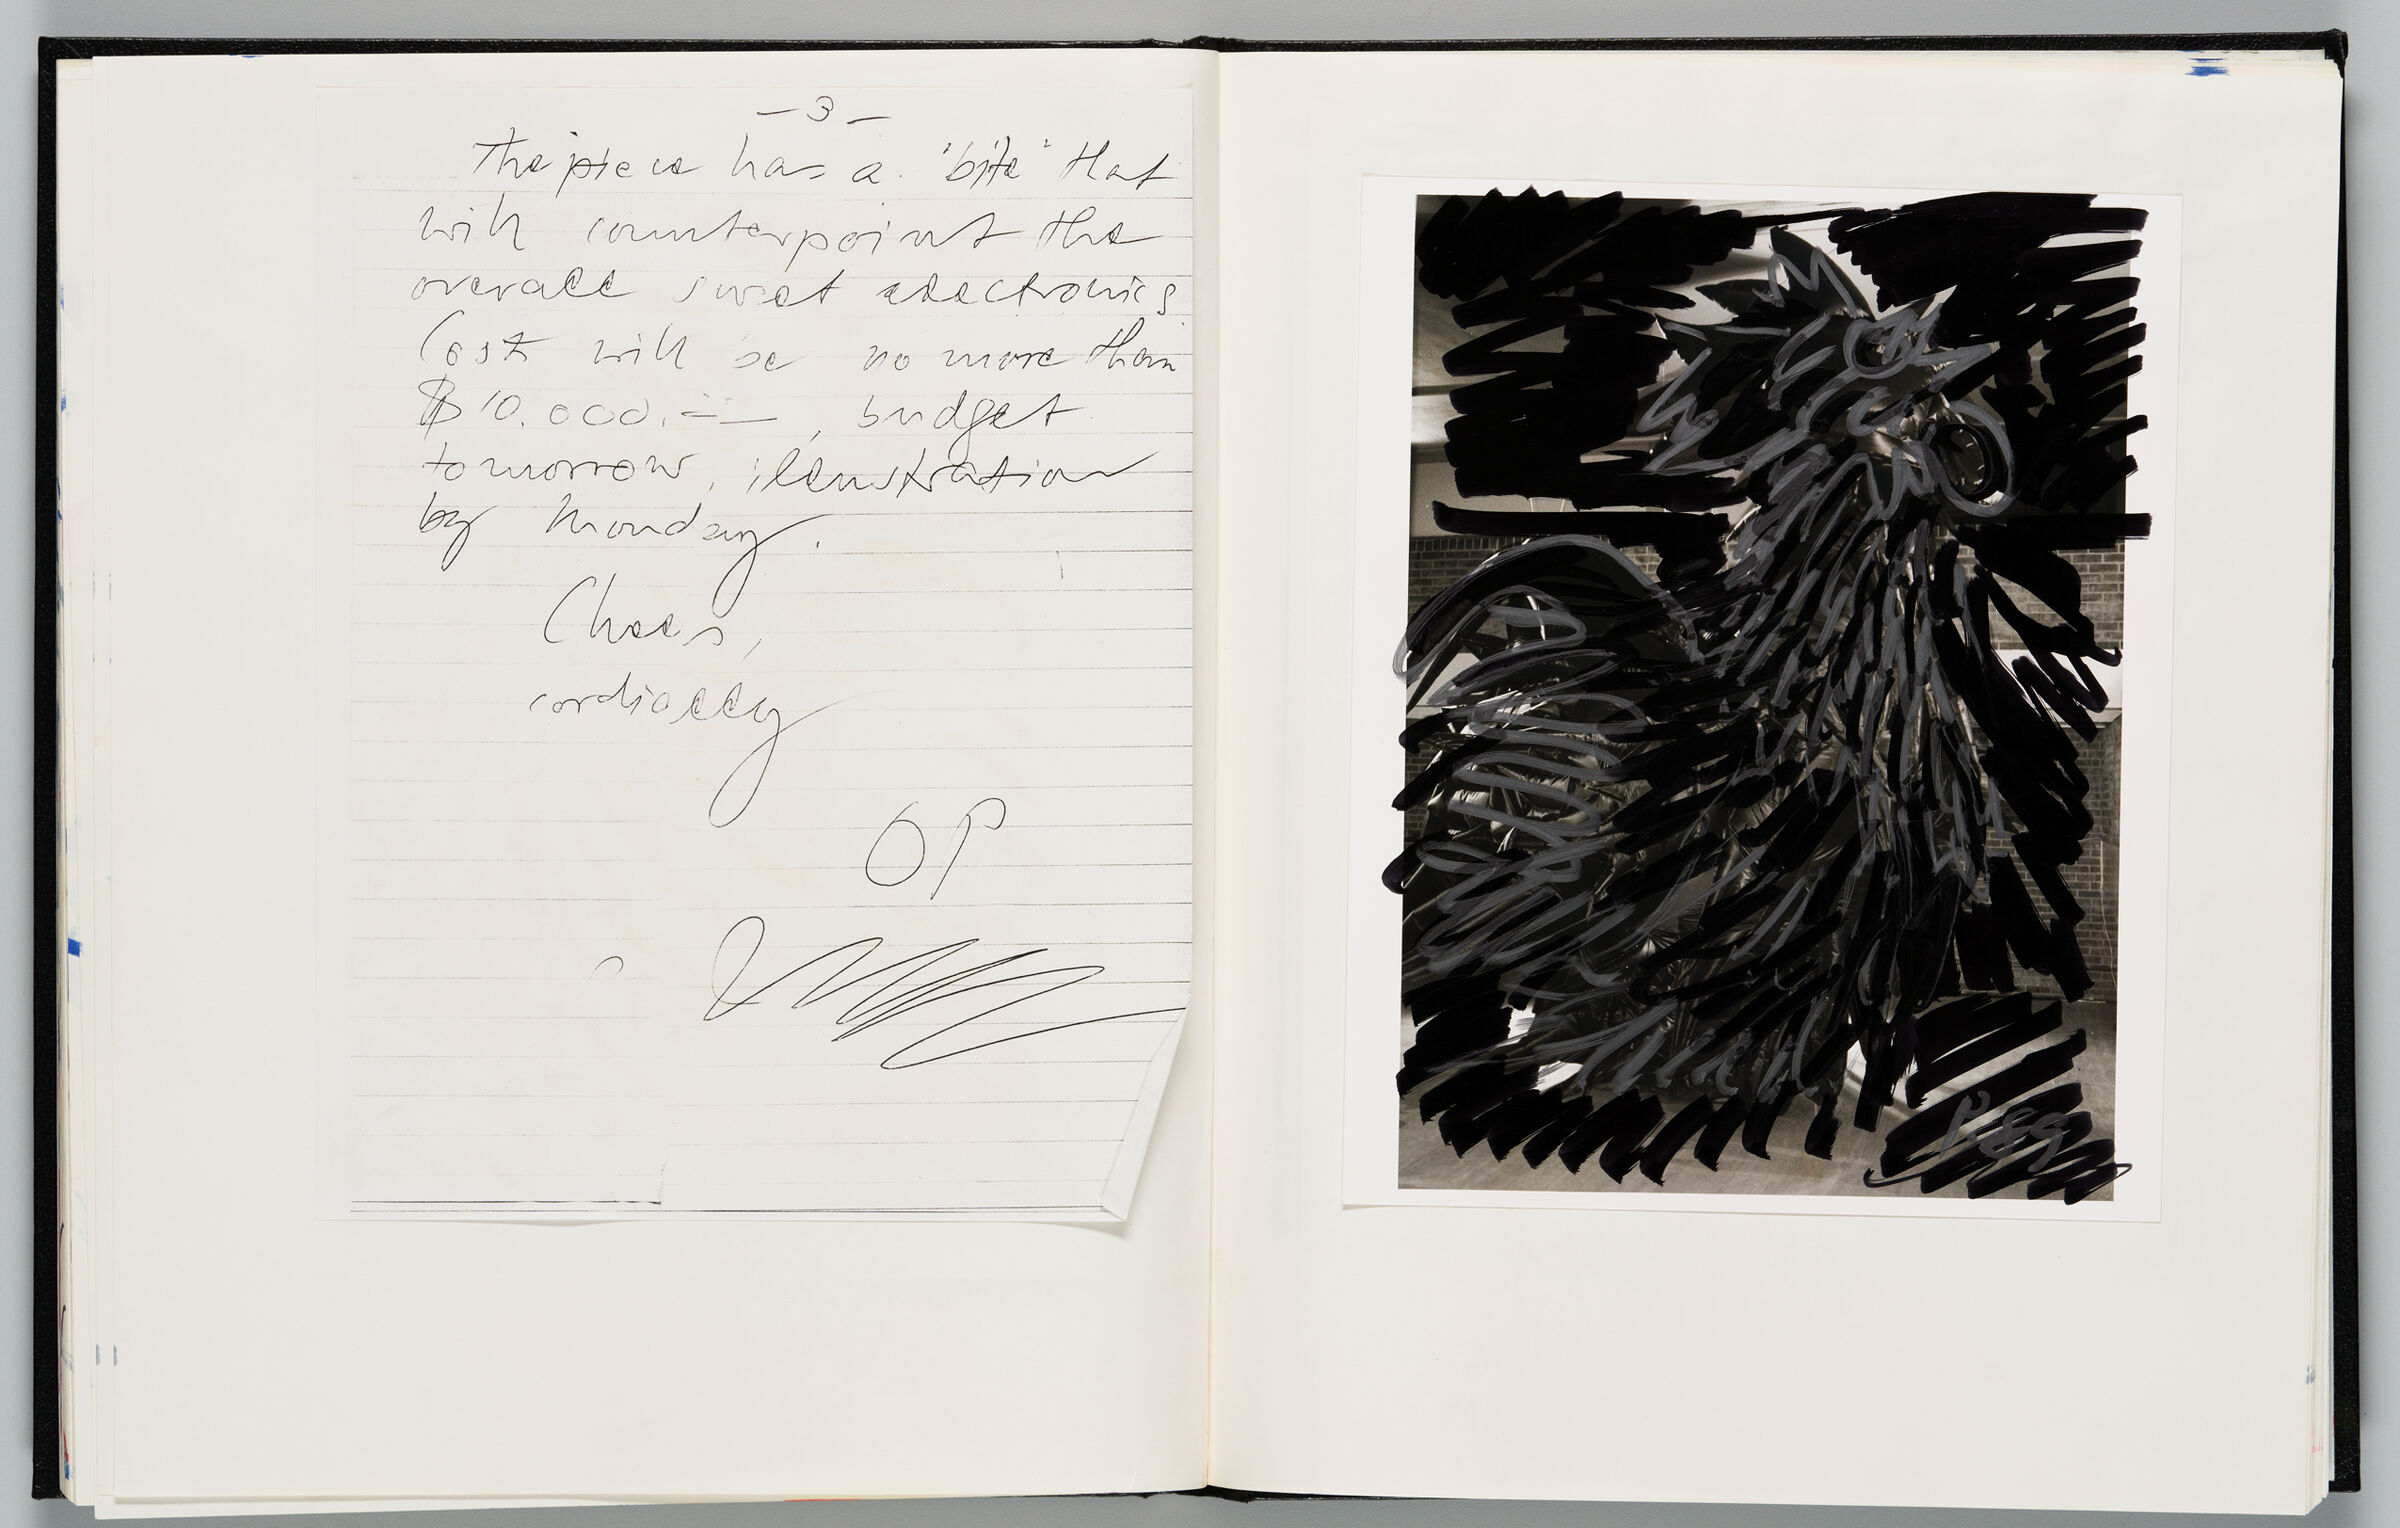 Untitled (Page Of Photocopied Letter, Left Page); Untitled (Drawing Of Rooster Over Photograph, Right Page)